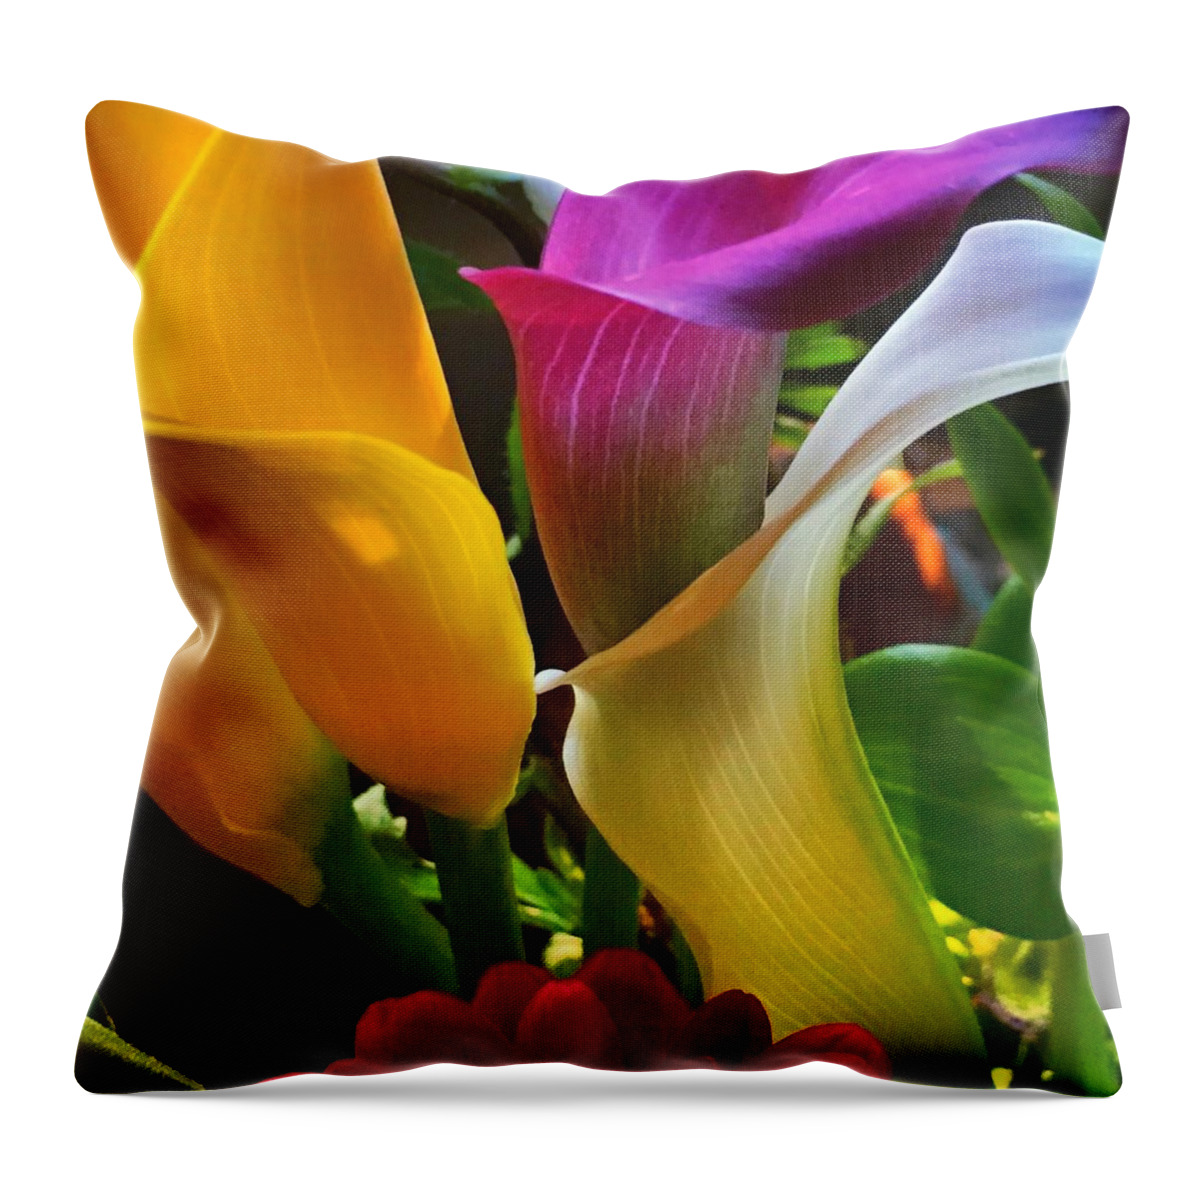 Birthday Throw Pillow featuring the photograph Birthday Flowers by Anne Thurston